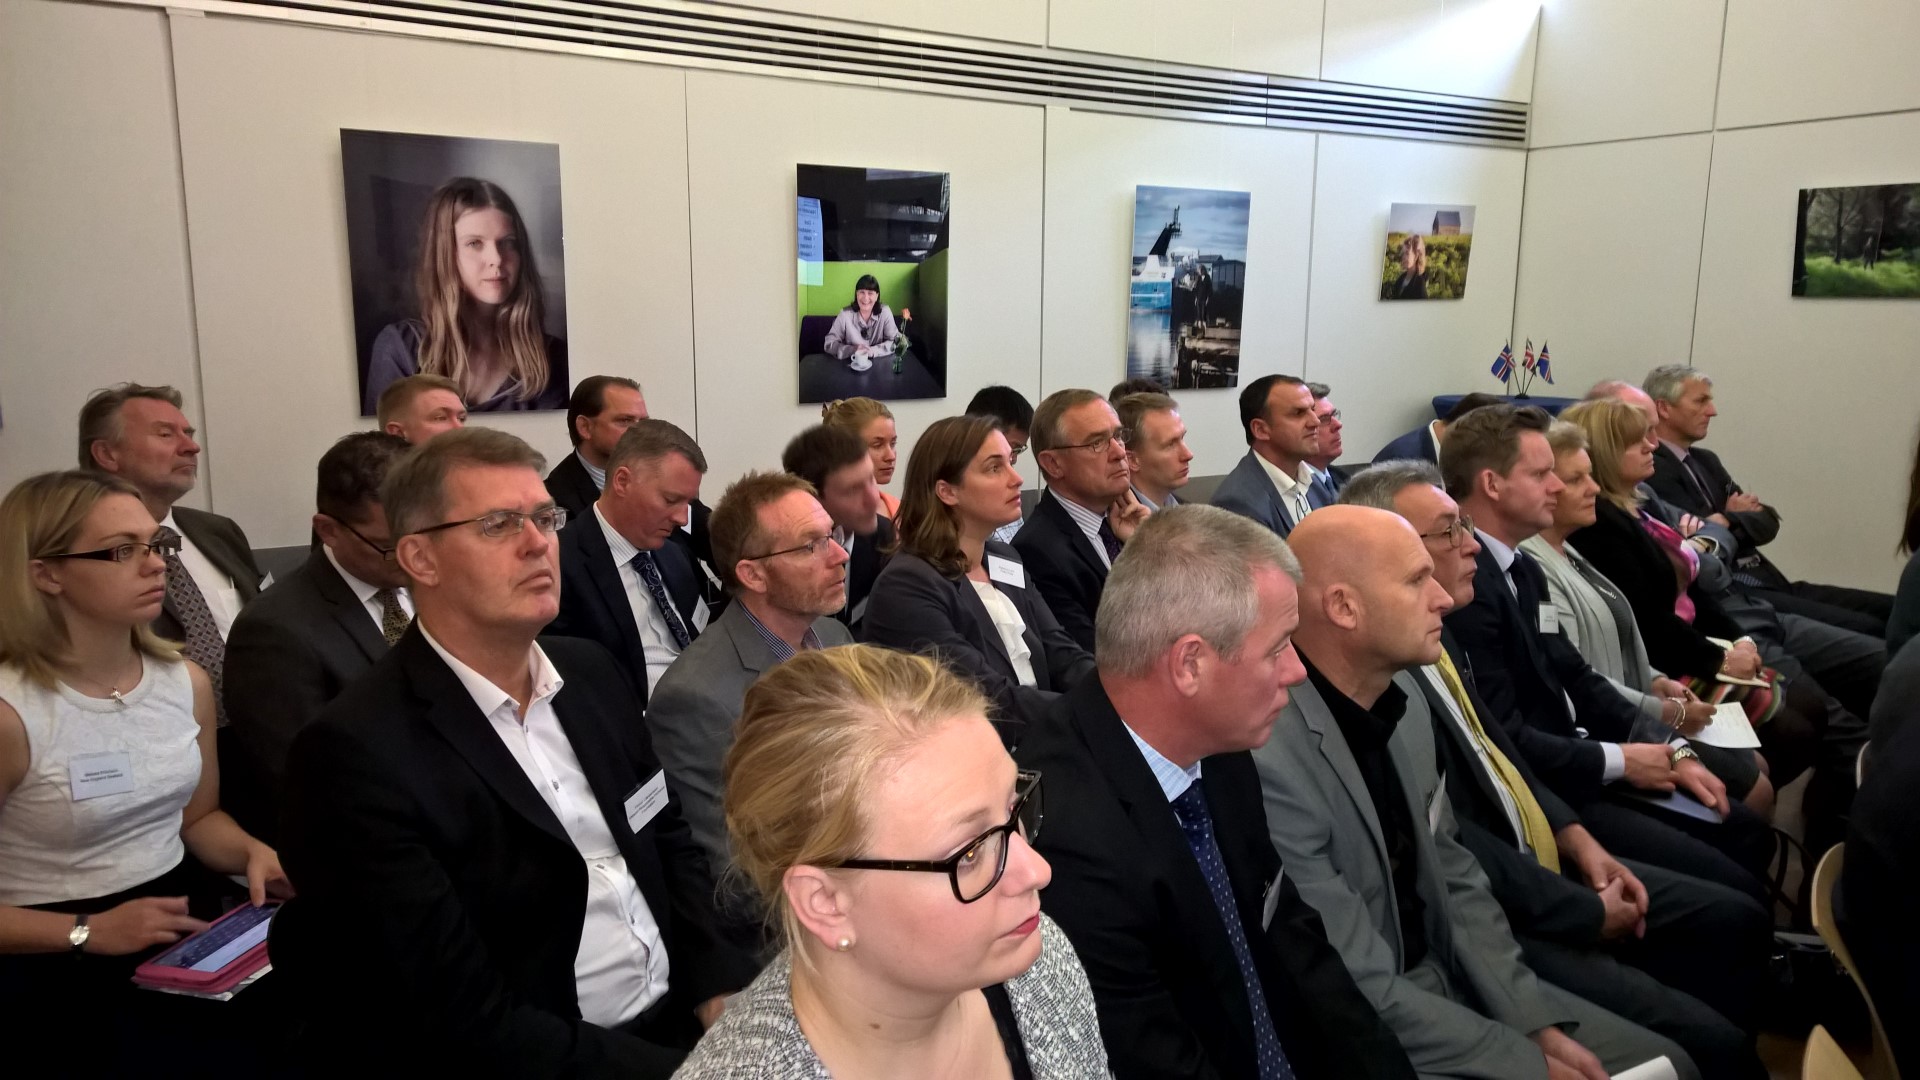 IRF's workshop in London was well received